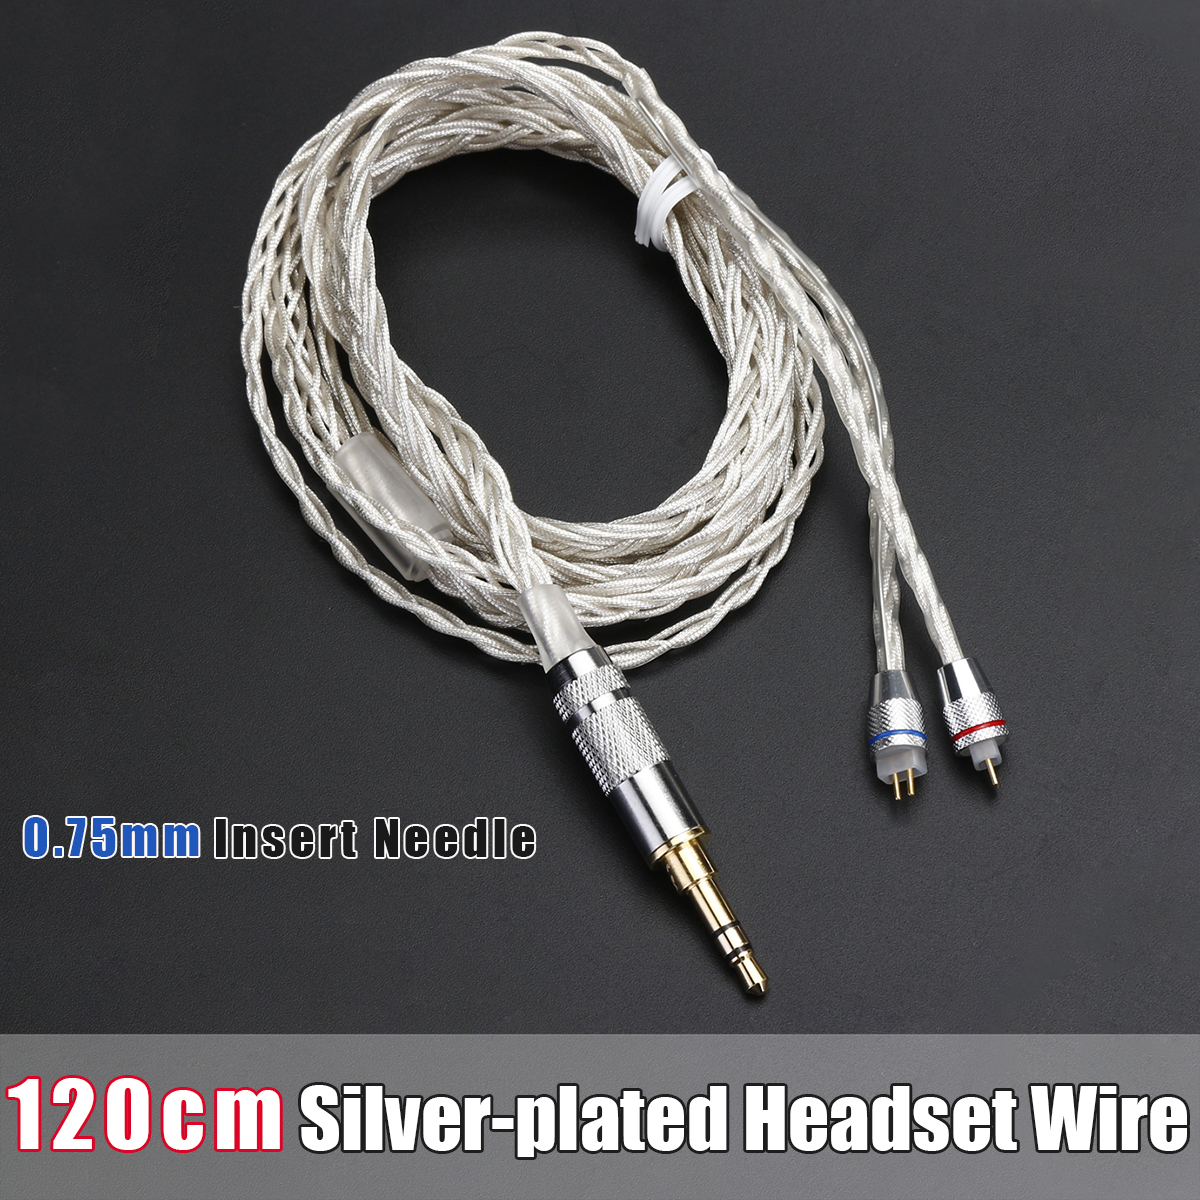 075mm-Insert-Needle-Braided-Headphone-Cable-Earphone-Wire-For-KZ-ZSTZSRES3ED12-Earphone-1389942